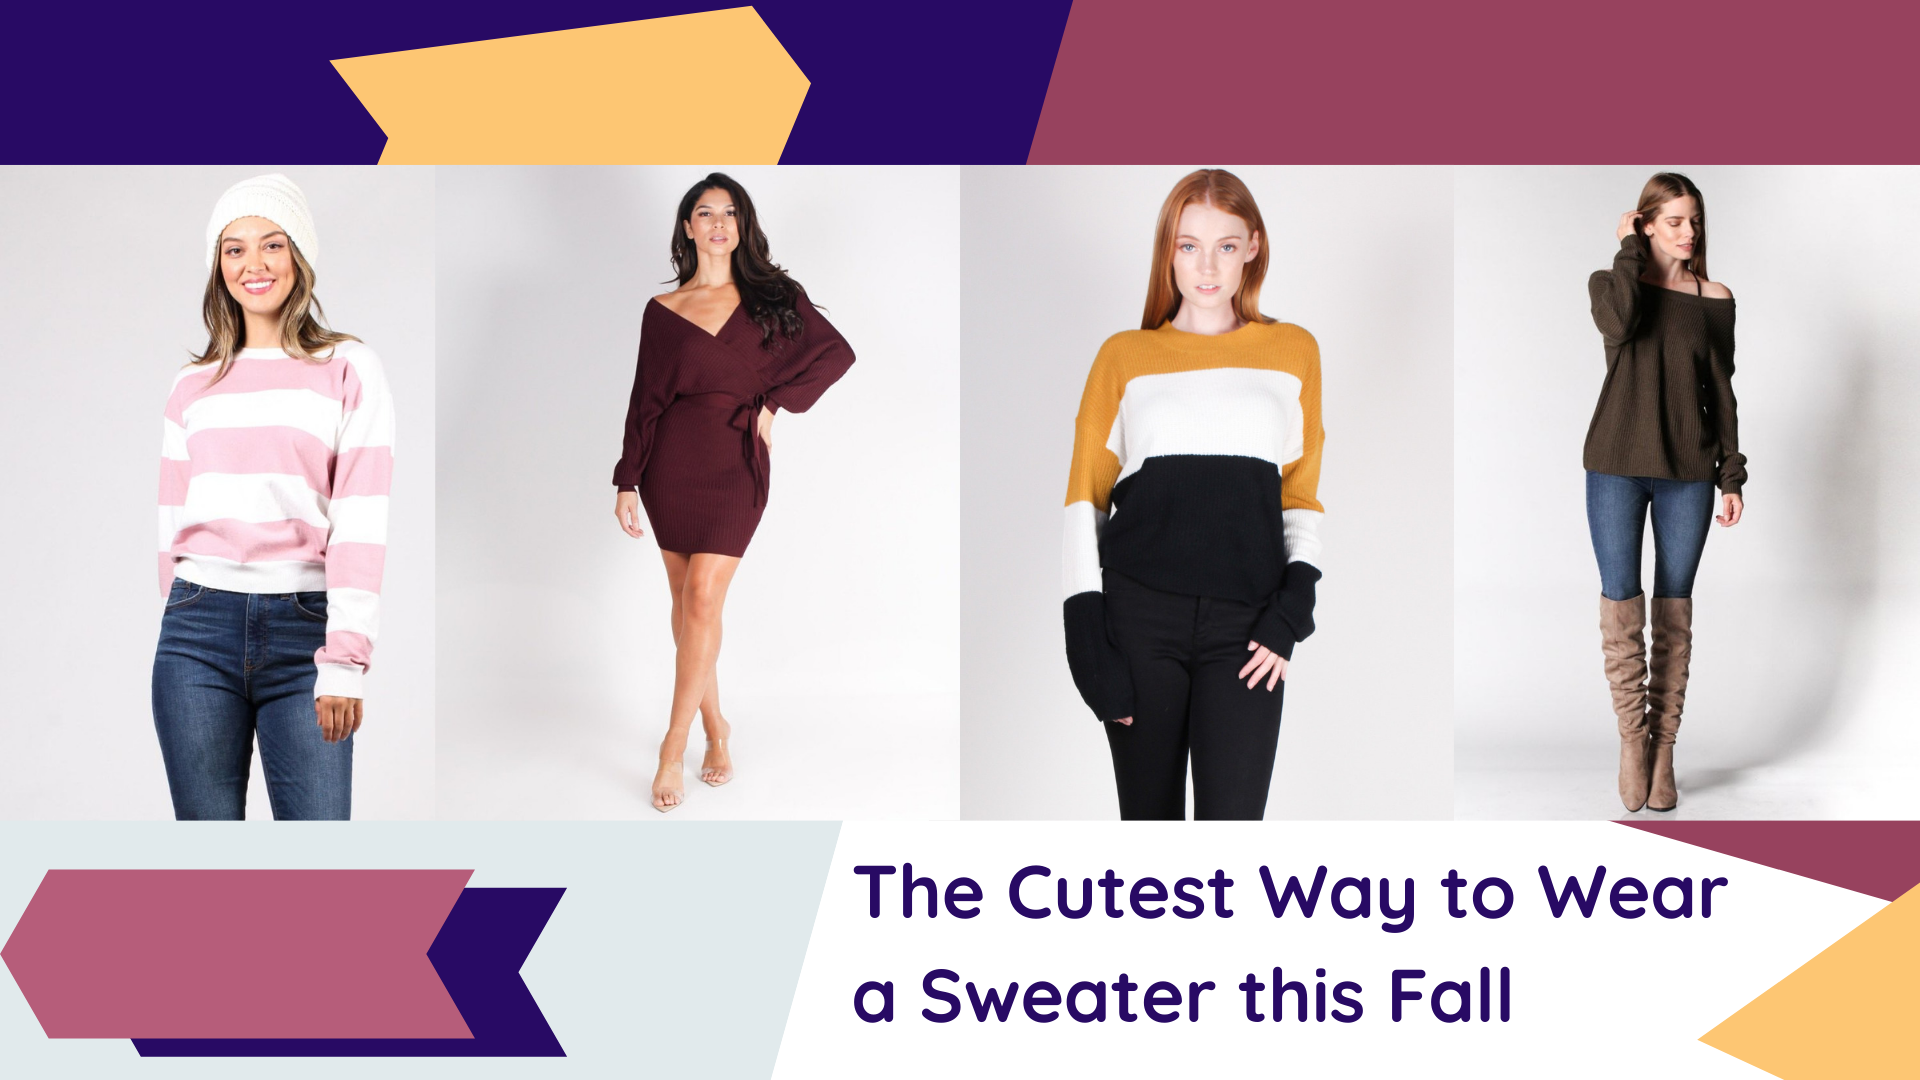 The Cutest Way to Wear a Sweater this Fall